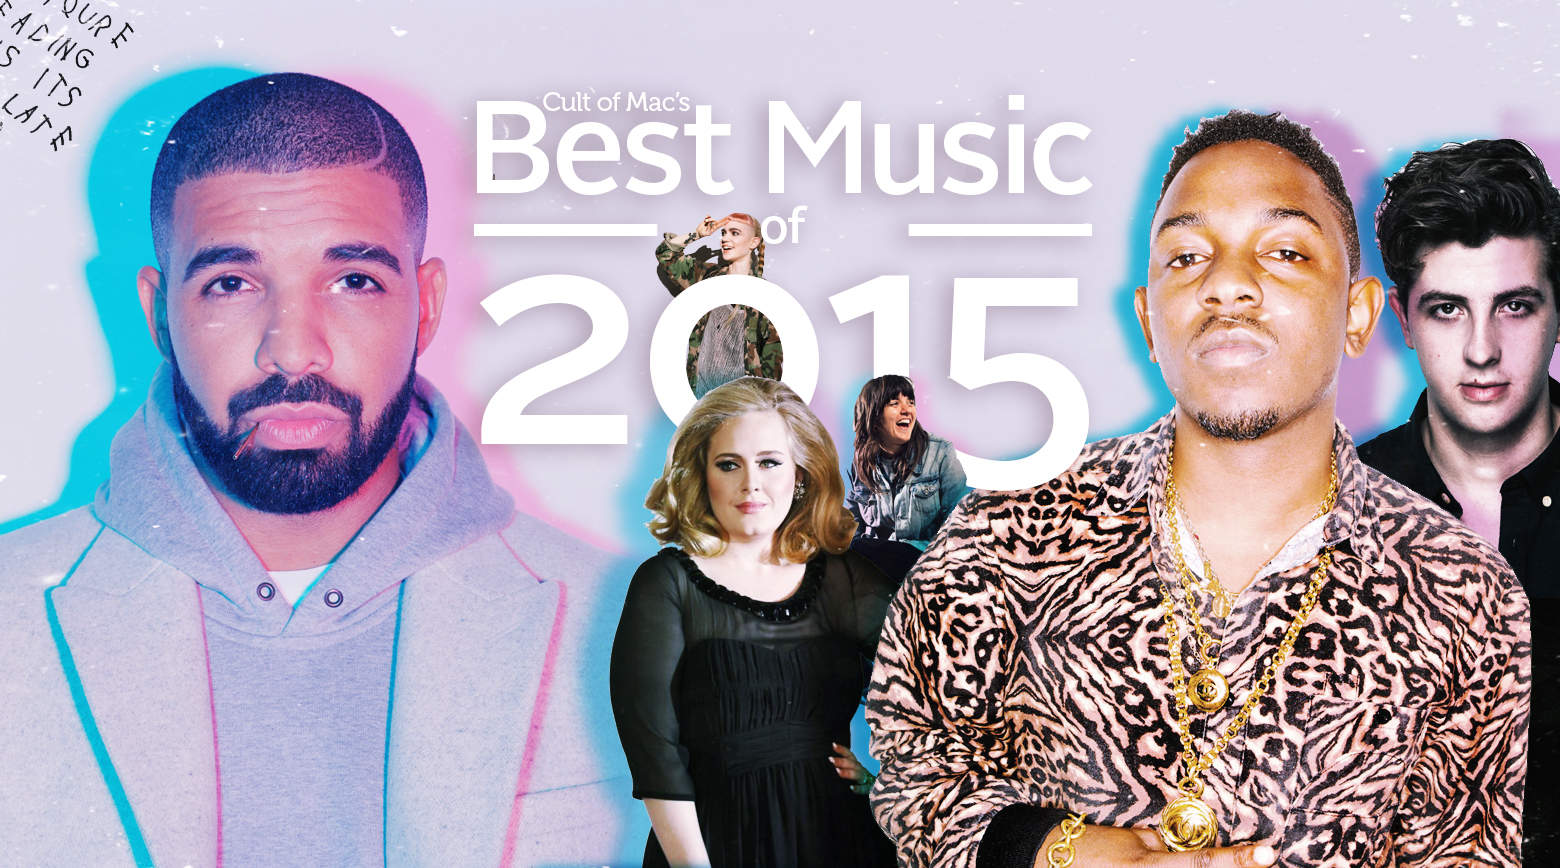 2015 was packed with incredible albums